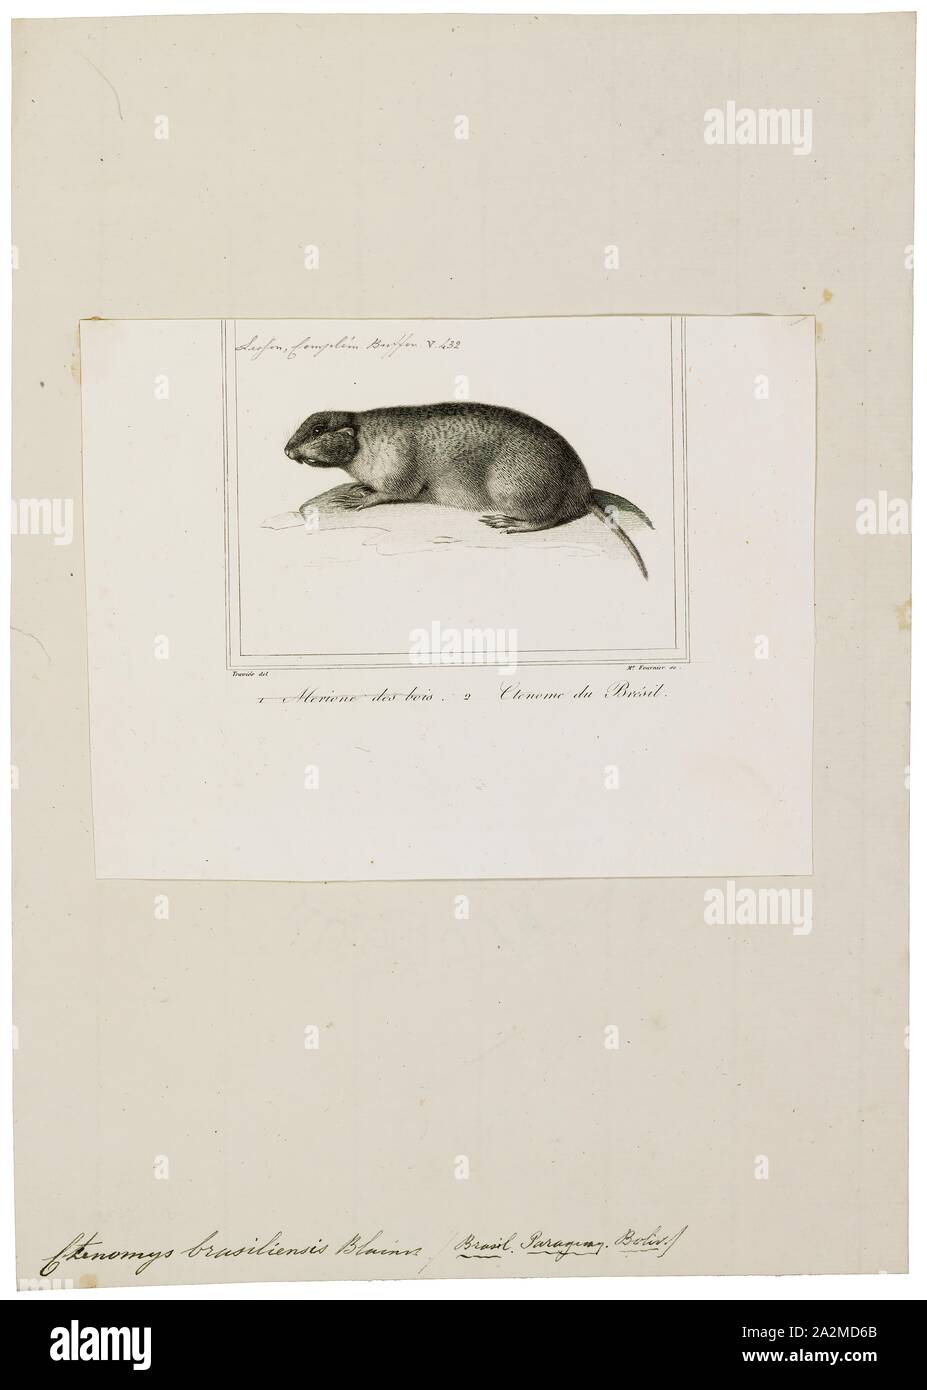 Ctenomys brasiliensis, Print, The Brazilian tuco-tuco (Ctenomys brasiliensis) is a tuco-tuco species from South America. It is found mainly in the state of Minas Gerais in southeastern Brazil, though Charles Darwin mentions it during his trip through present-day Uruguay., 1700-1880 Stock Photo